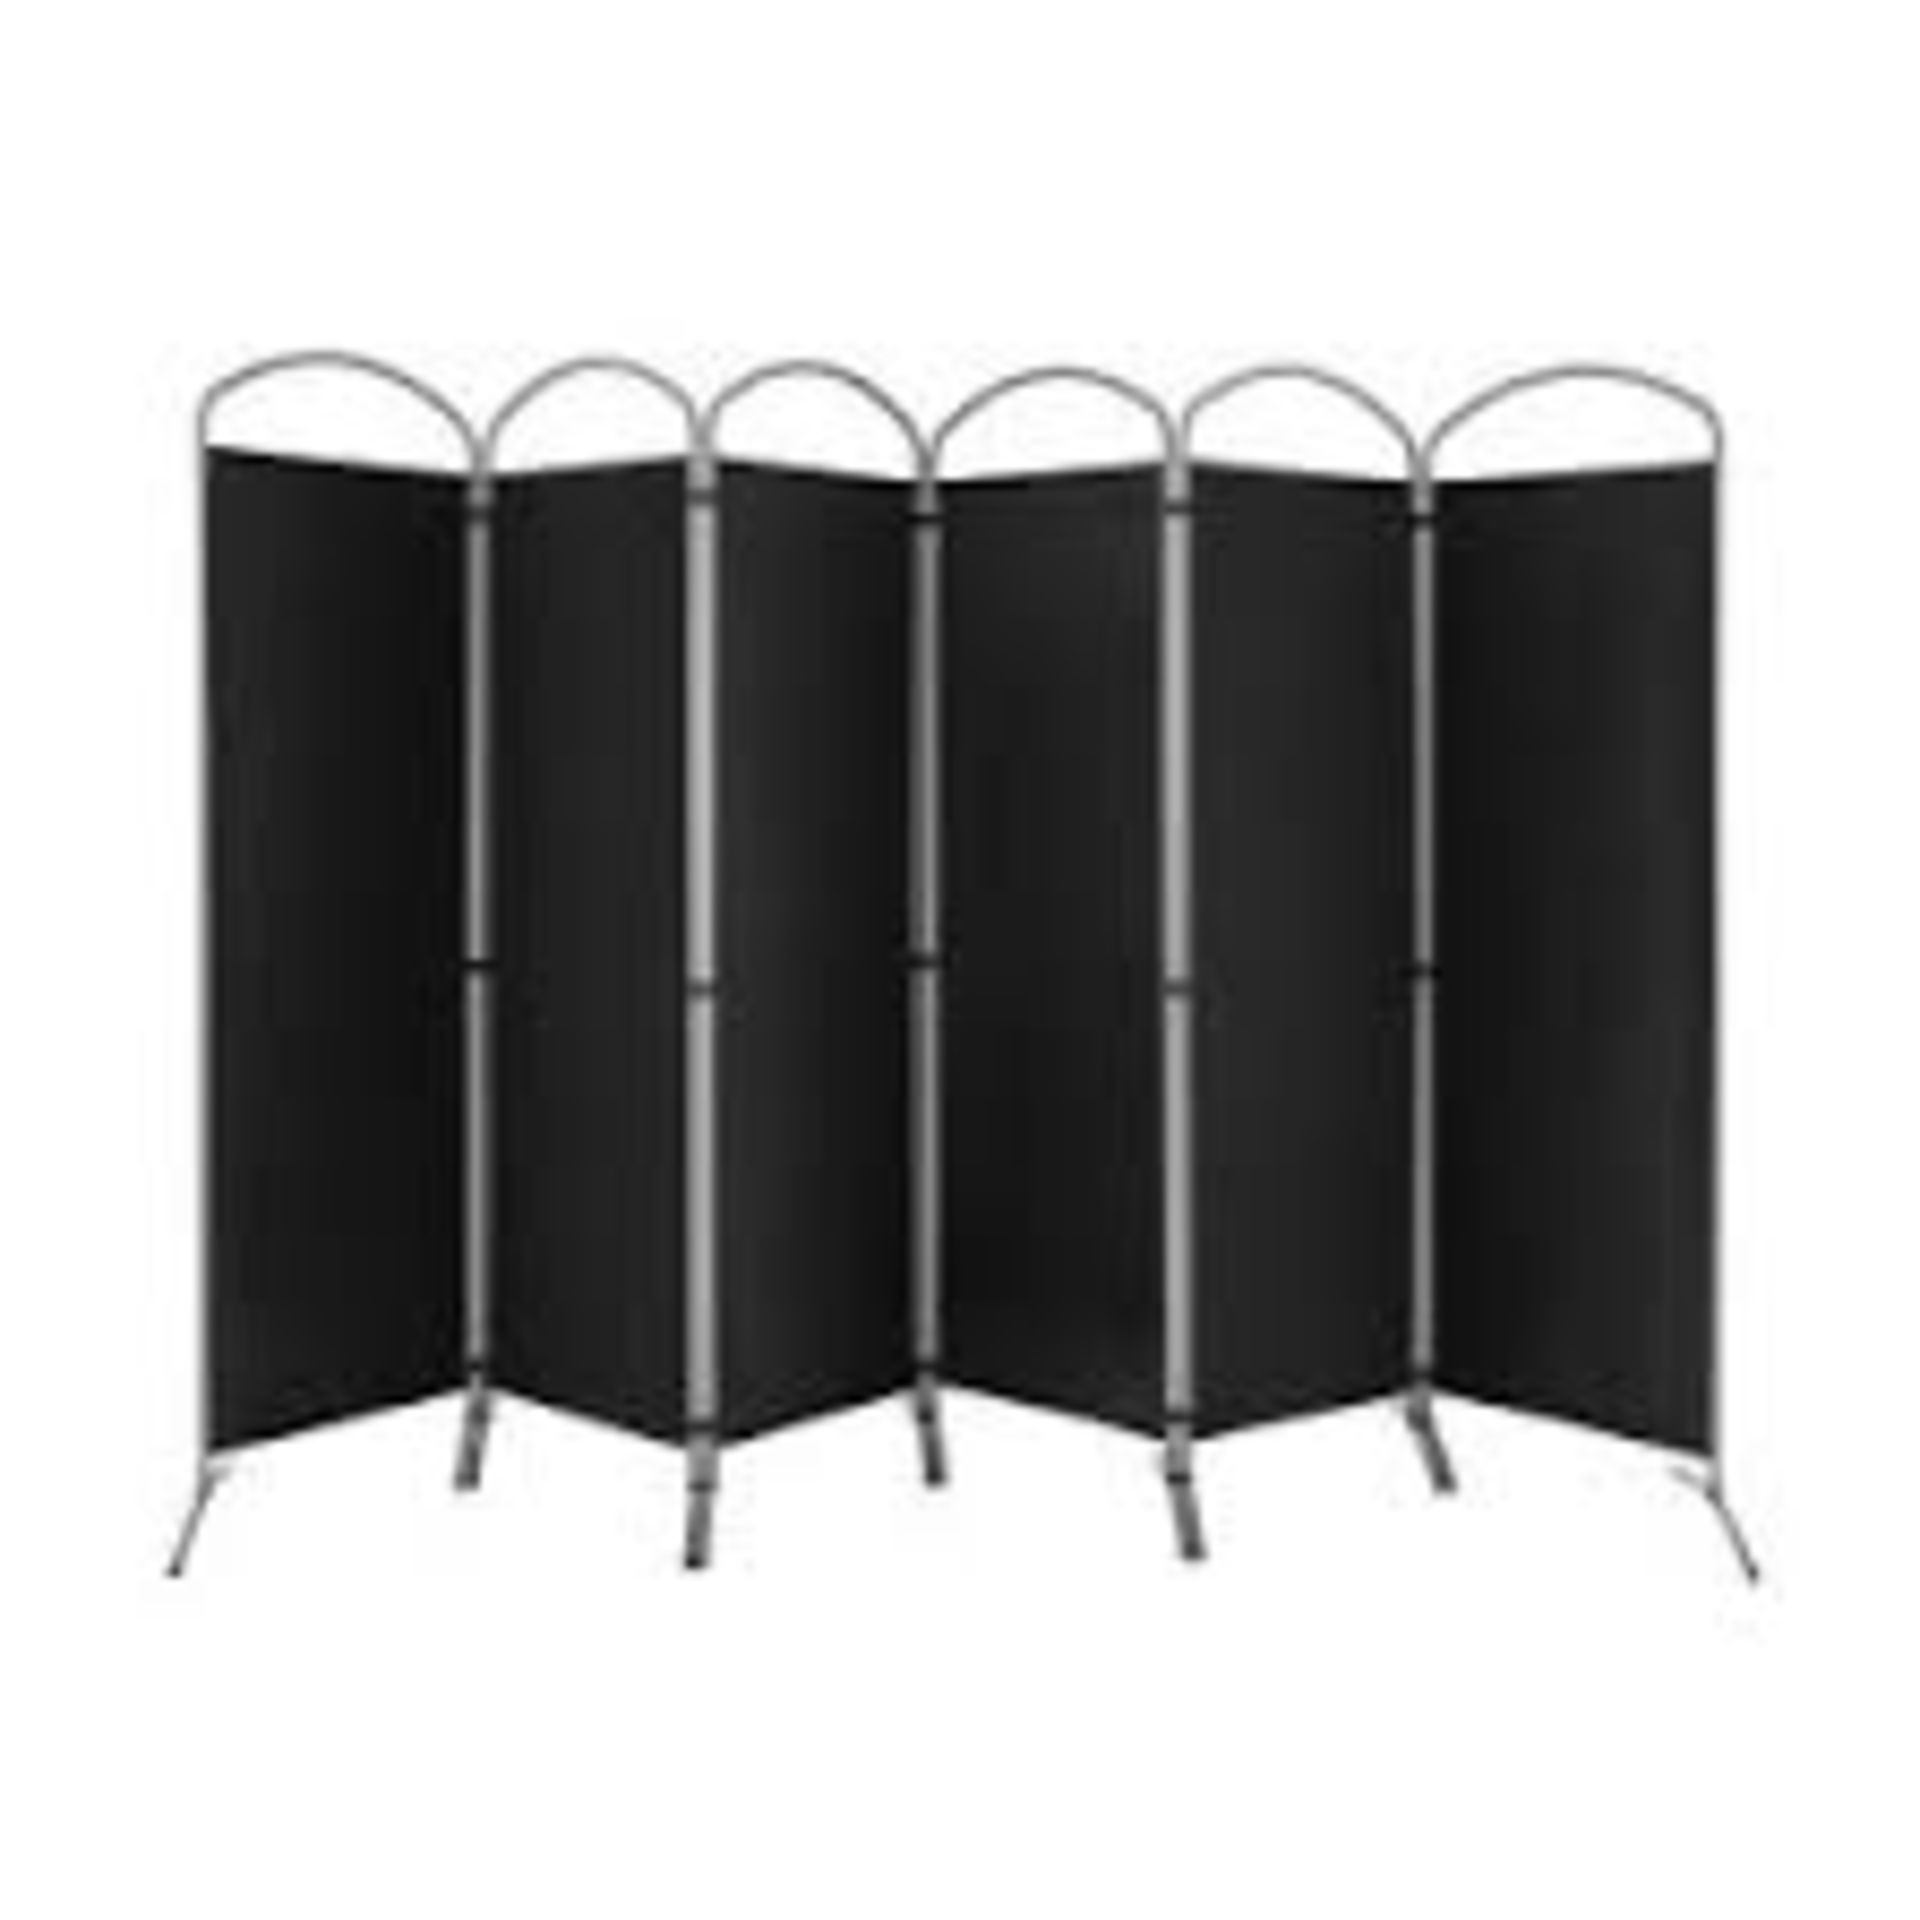 6 Panel Folding Room Divider with Hand-Woven Wicker f. - R14.15.